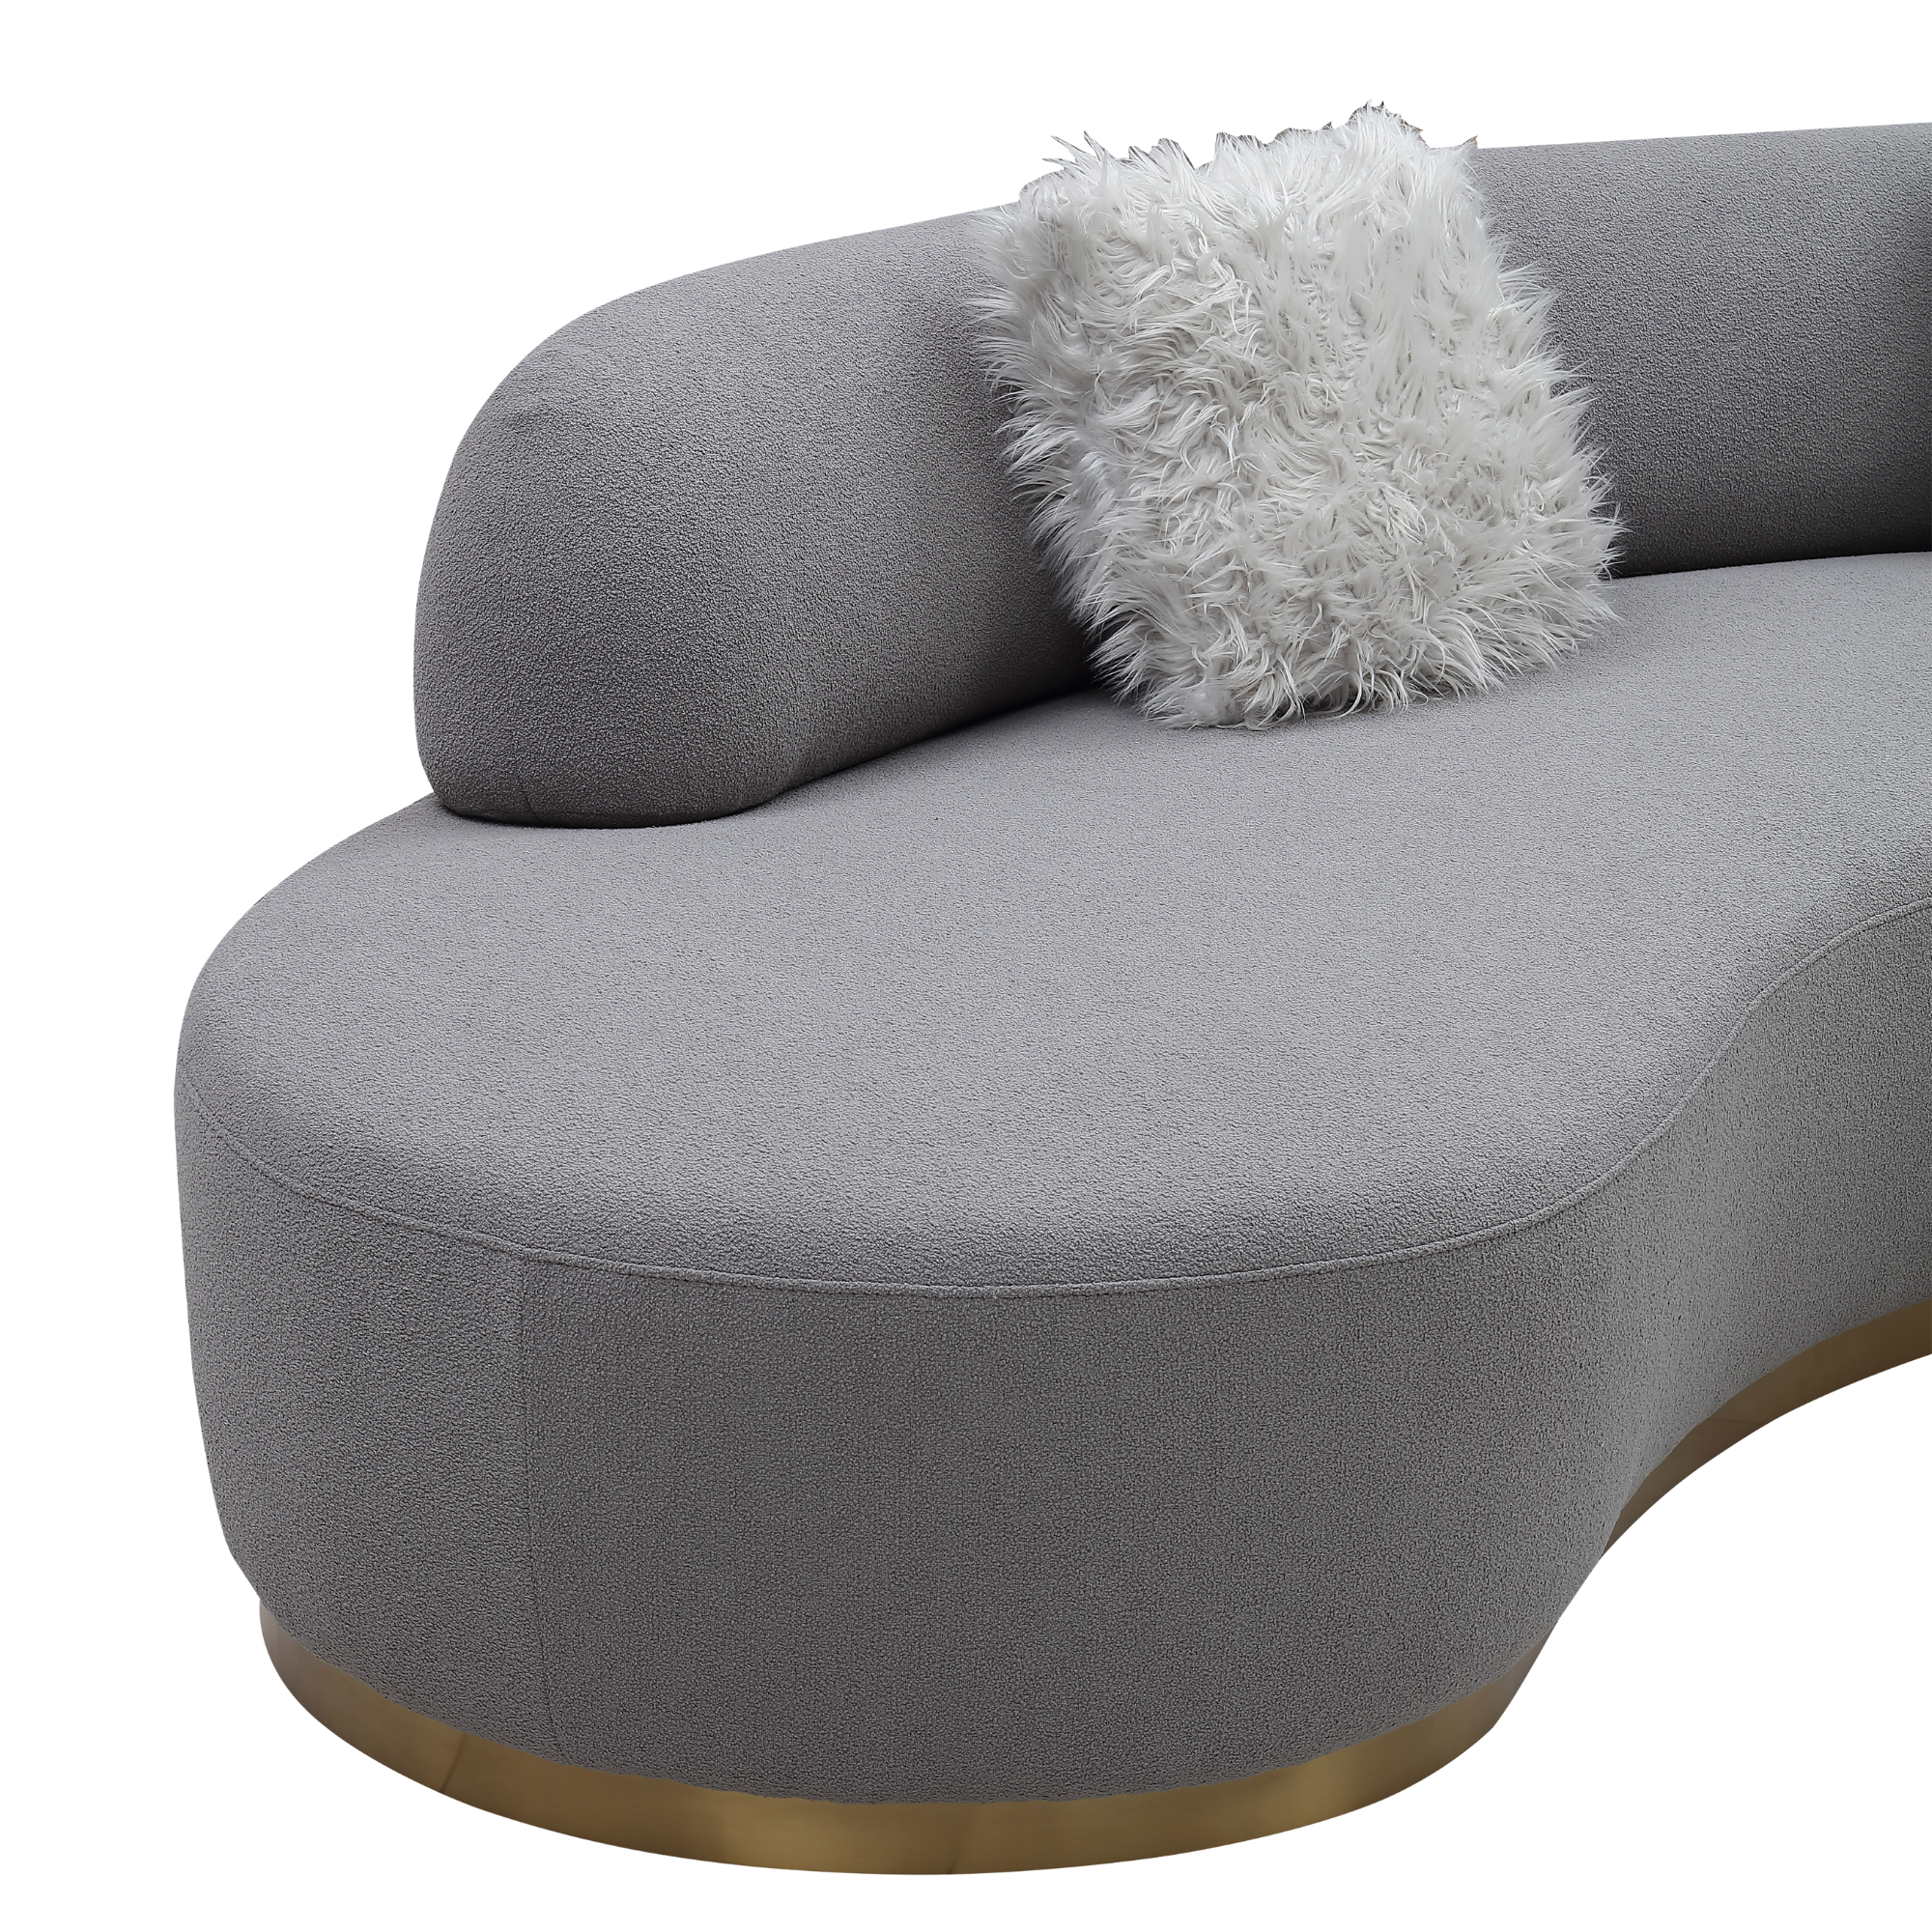 Object 2150 Curved Sofa in Gray Boucle